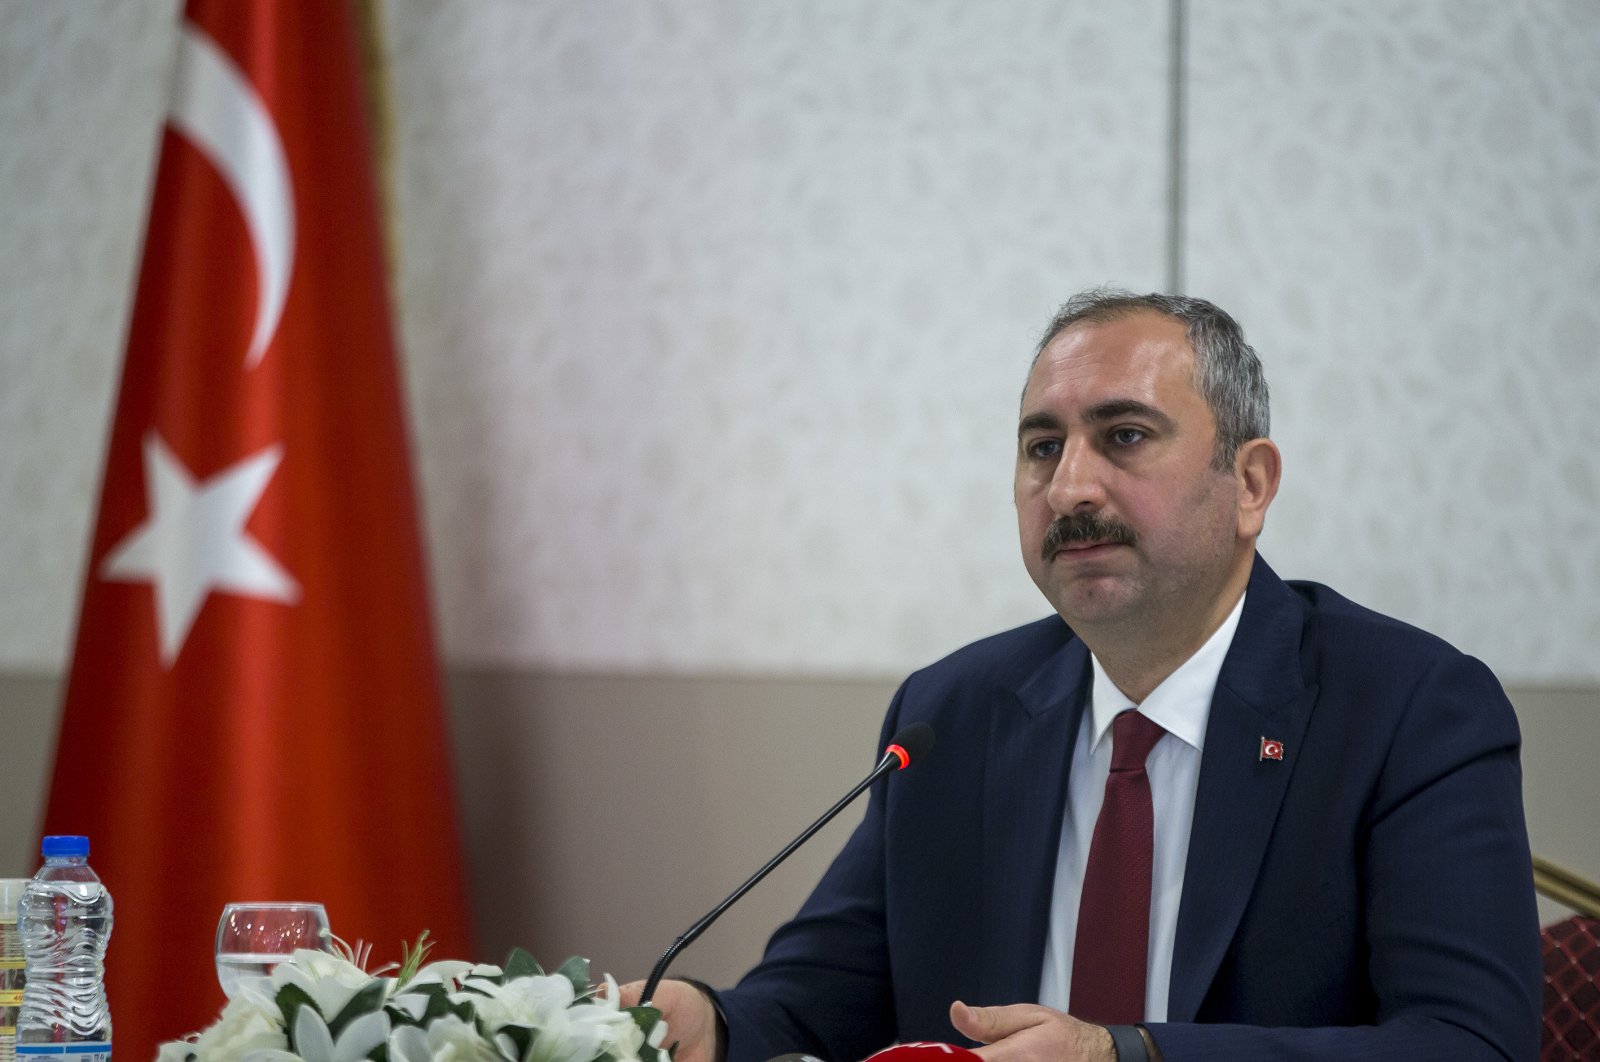 Justice Minister Abdülhamit Gül speaks to reporters in a news conference on May 4, 2020 (AA File Photo)